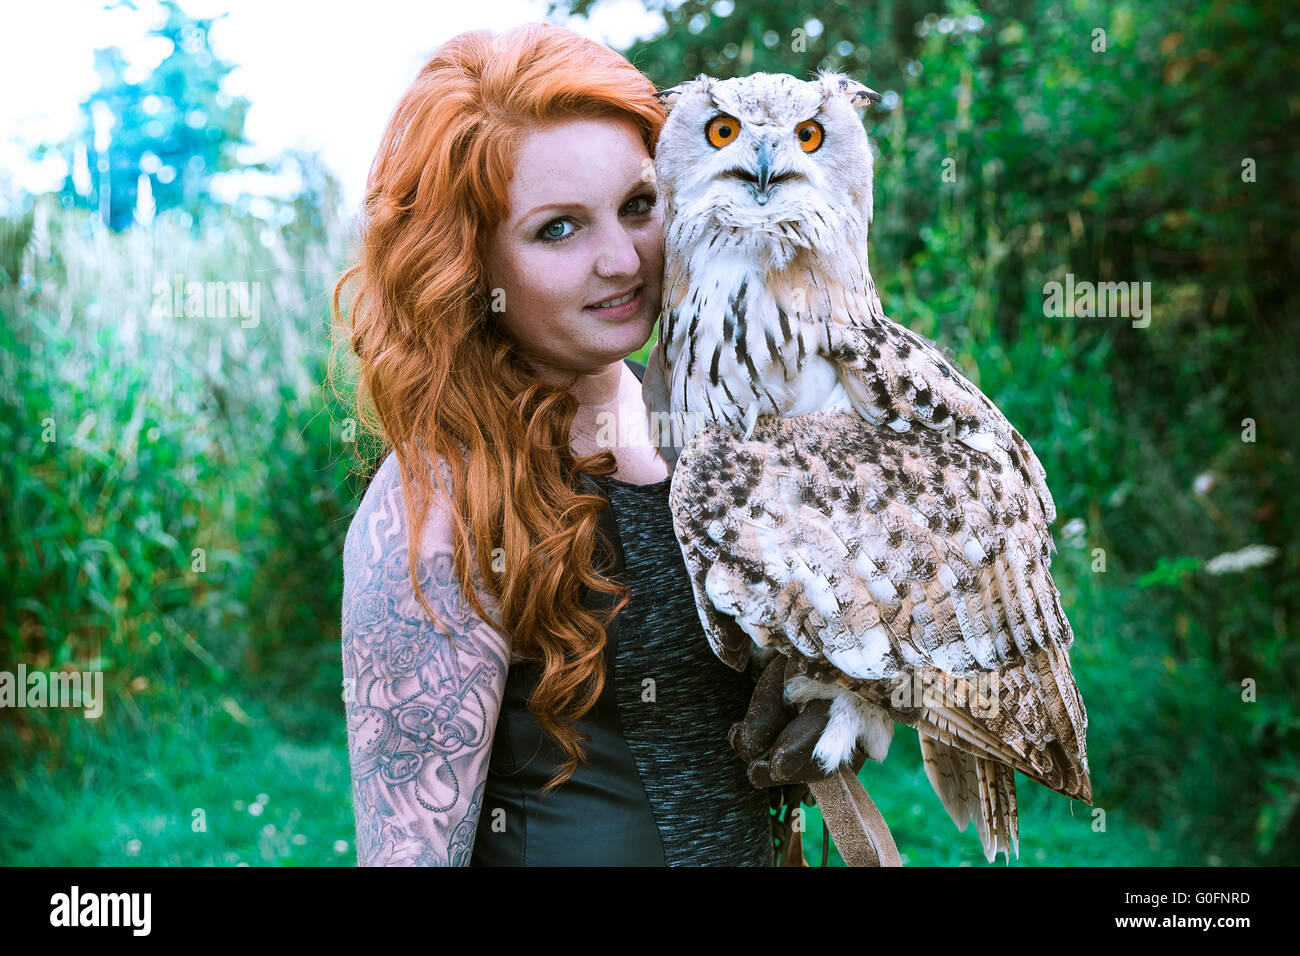 the owl with the lady Stock Photo